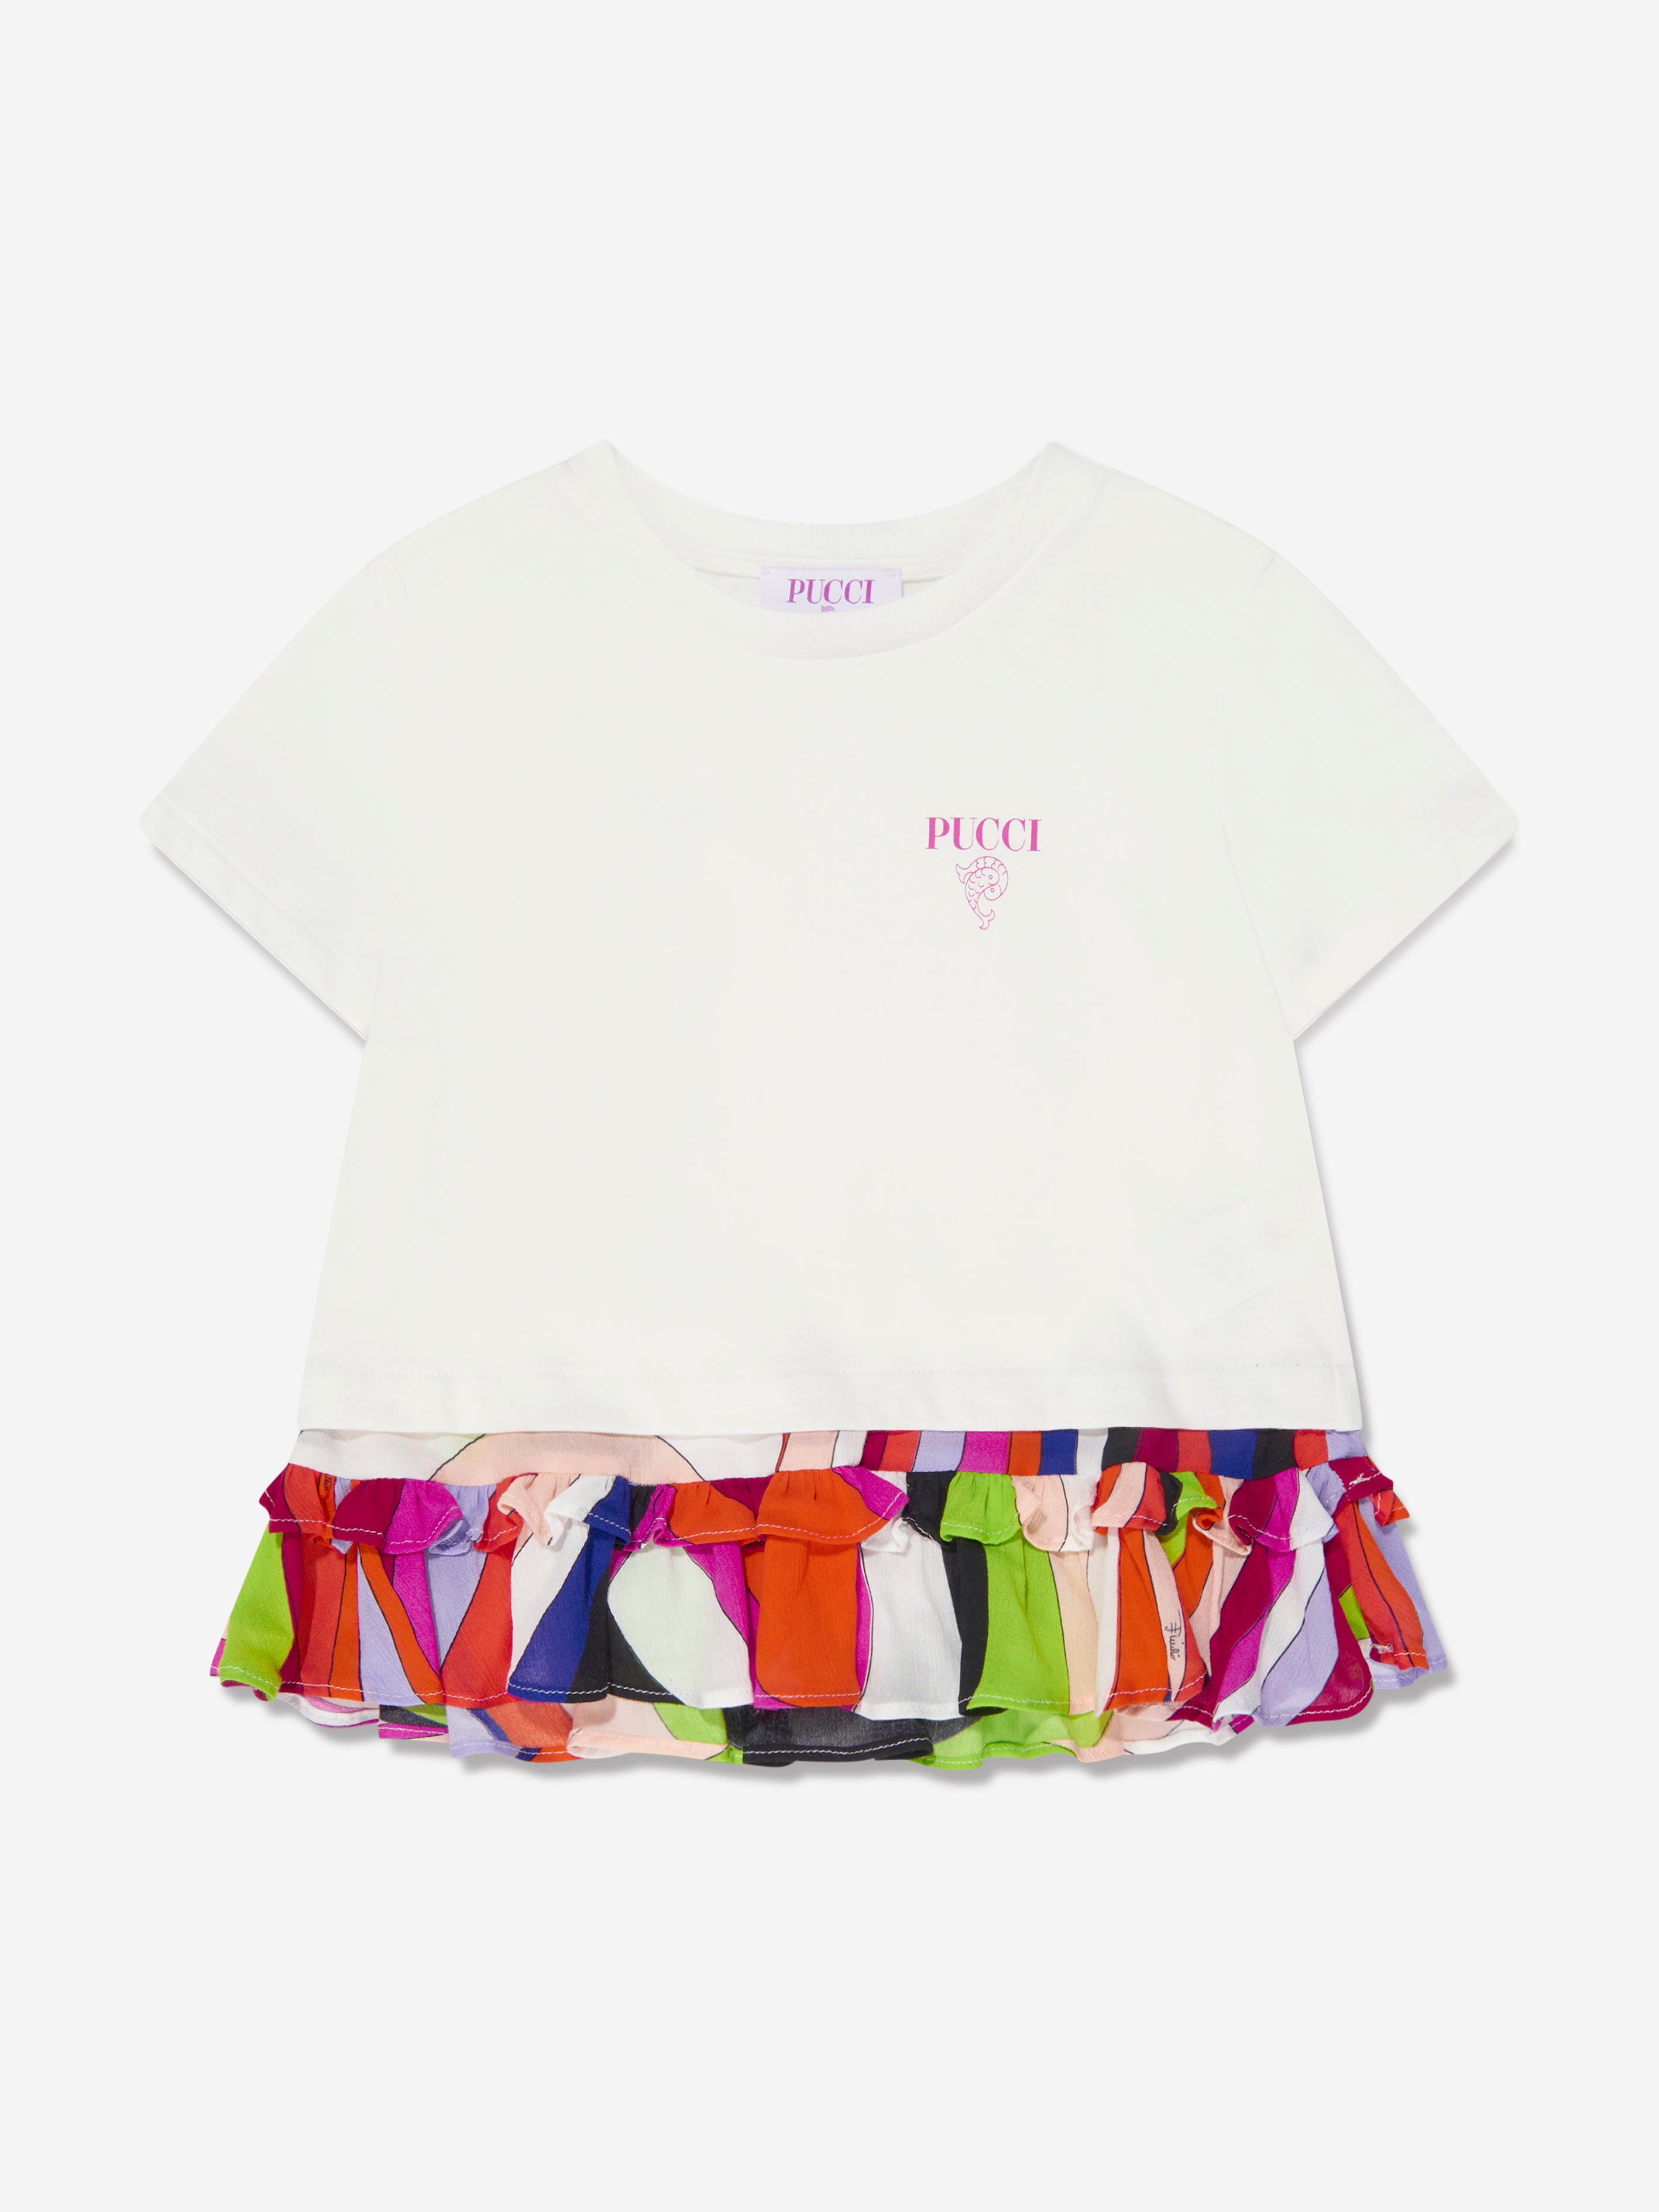 Emilio Pucci Girls Branded T-Shirt in Ivory | Childsplay Clothing